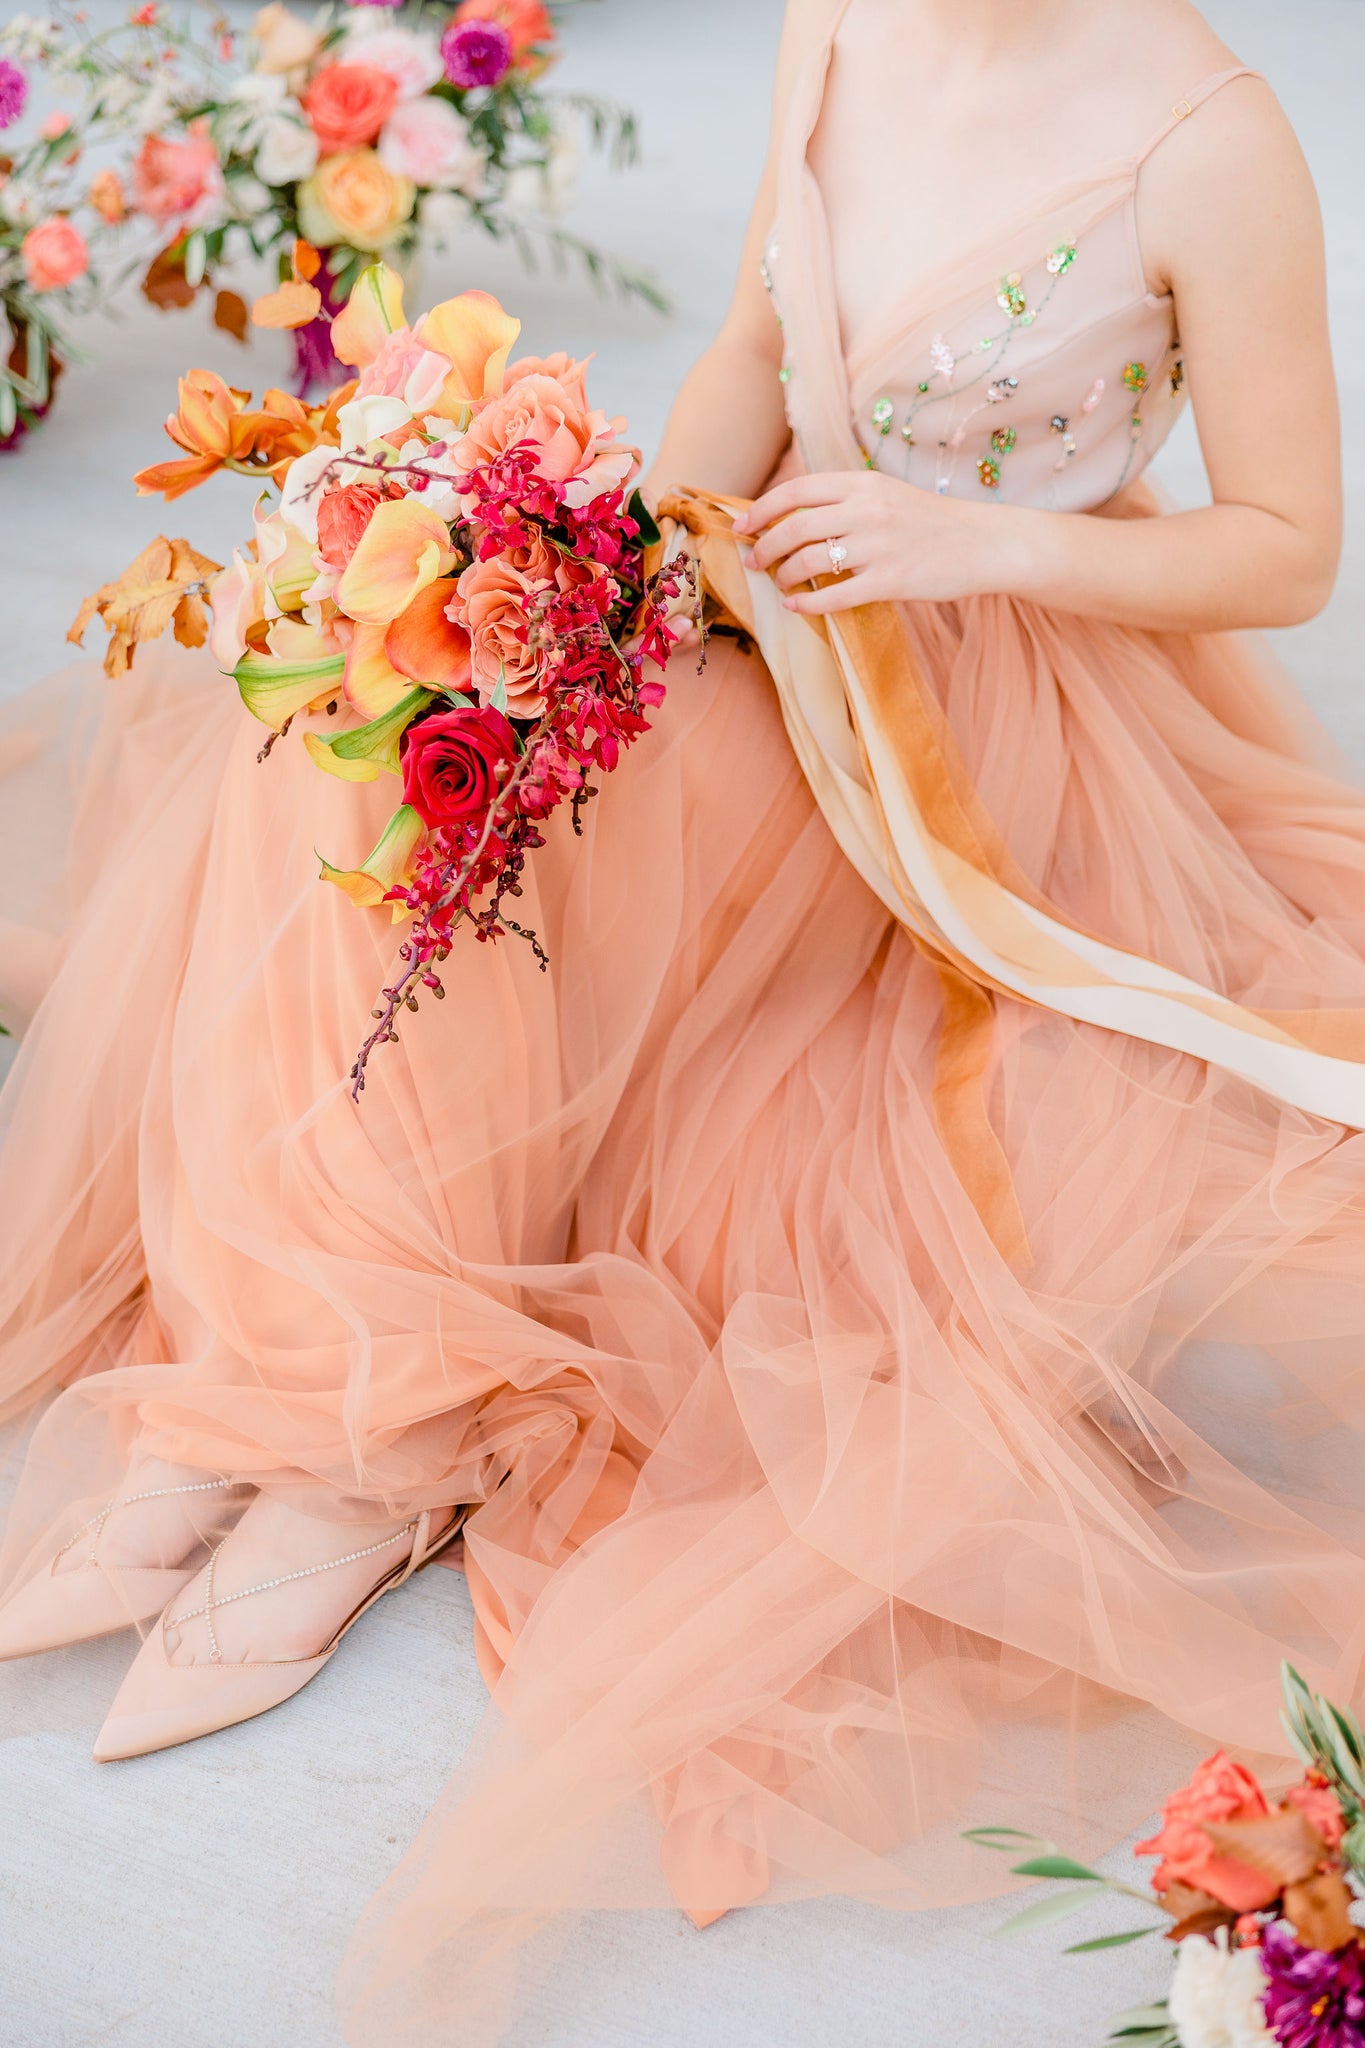 Violet and Peach Wedding Styling - The Wedding Community